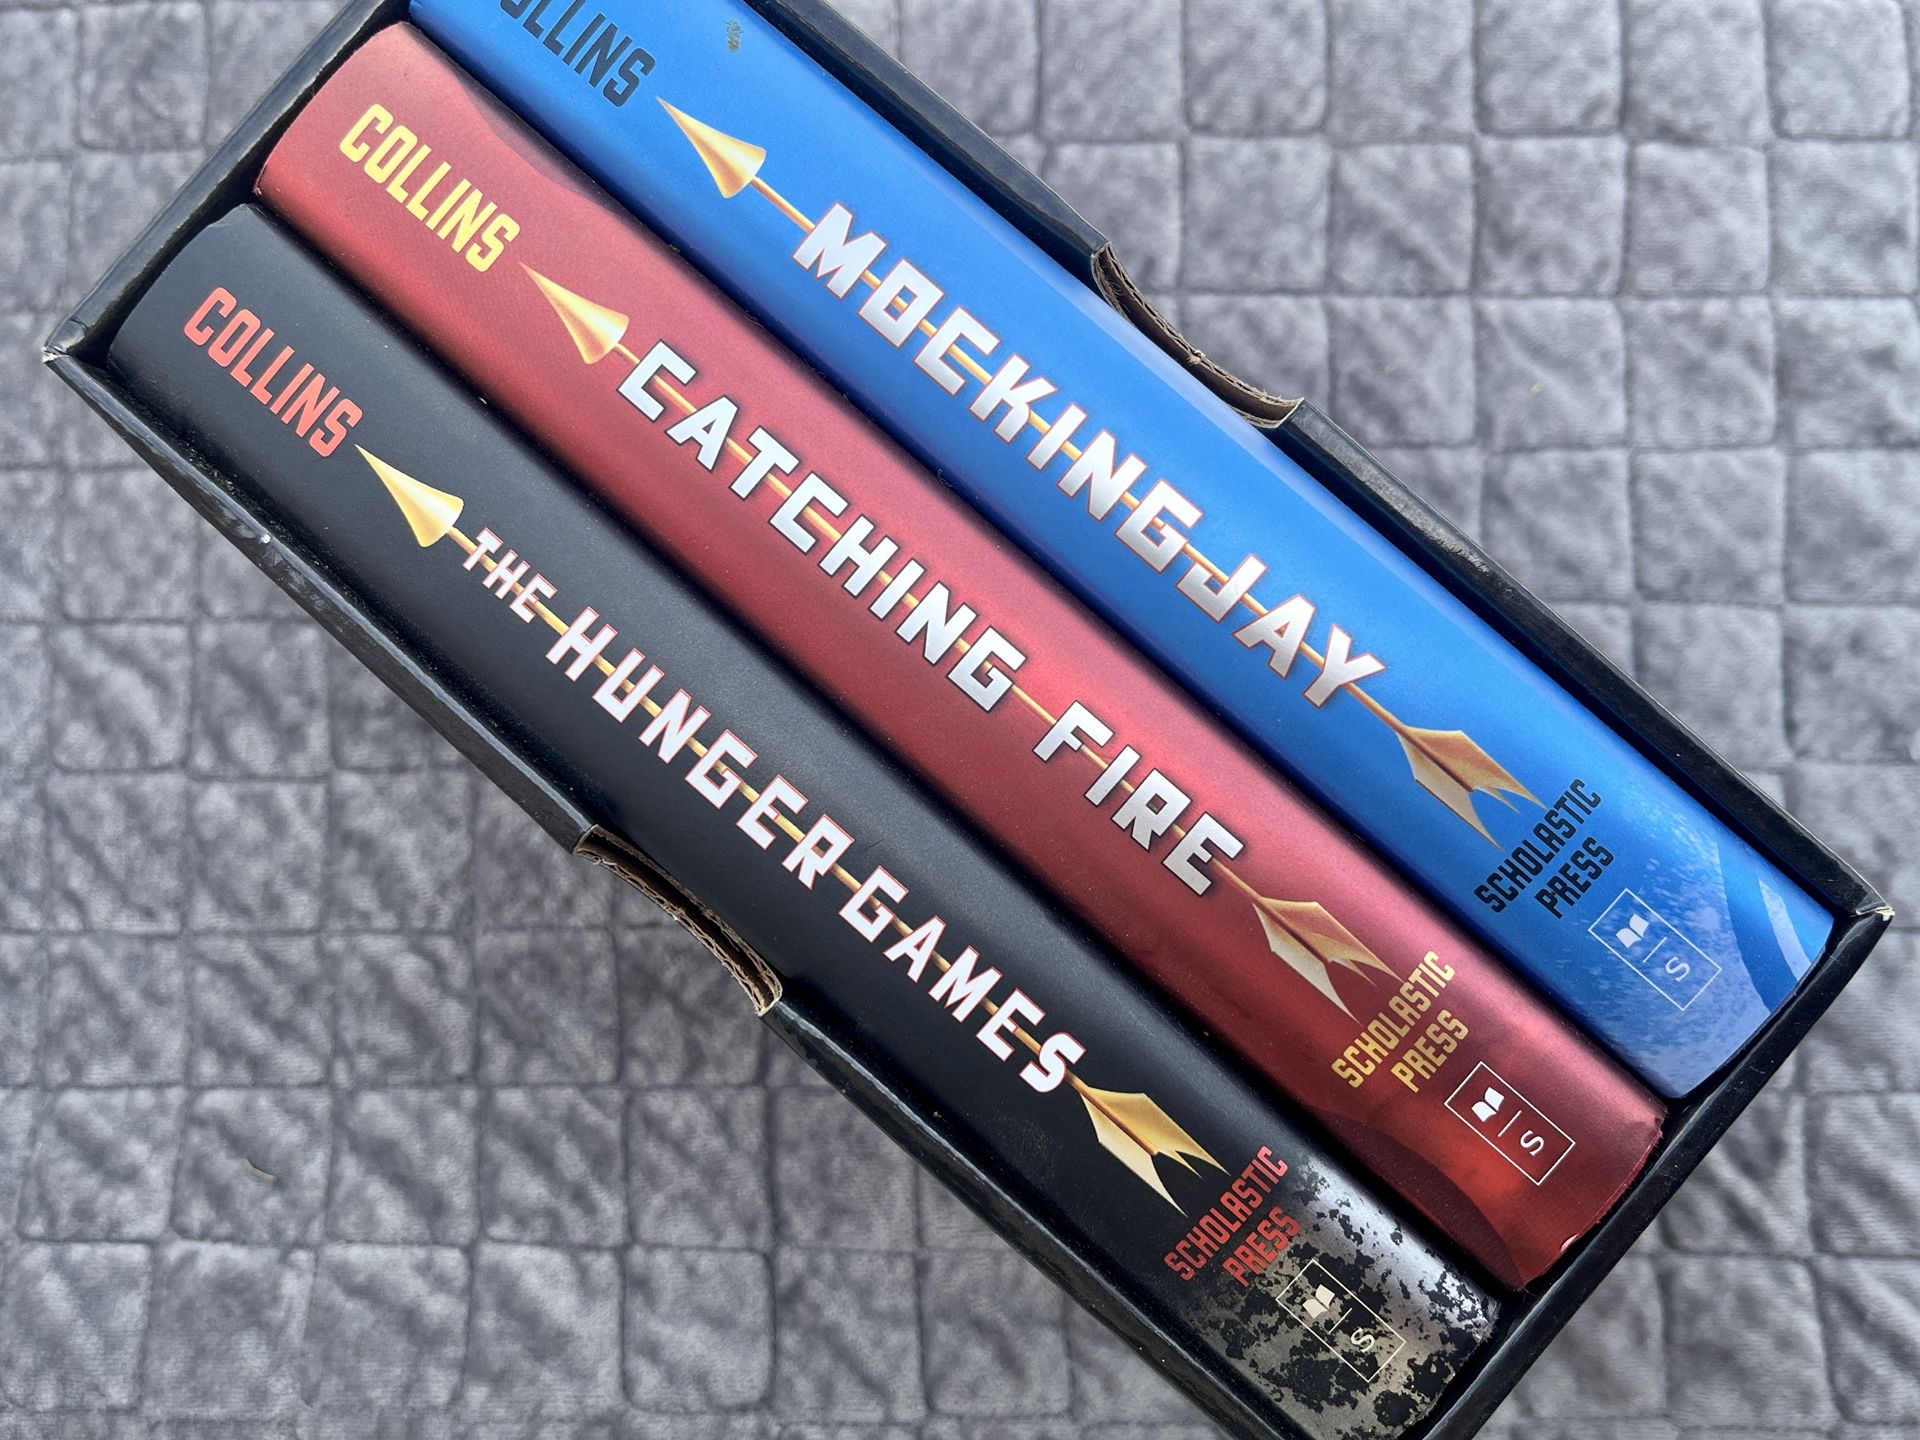 The Hunger Games Trilogy Book Set!